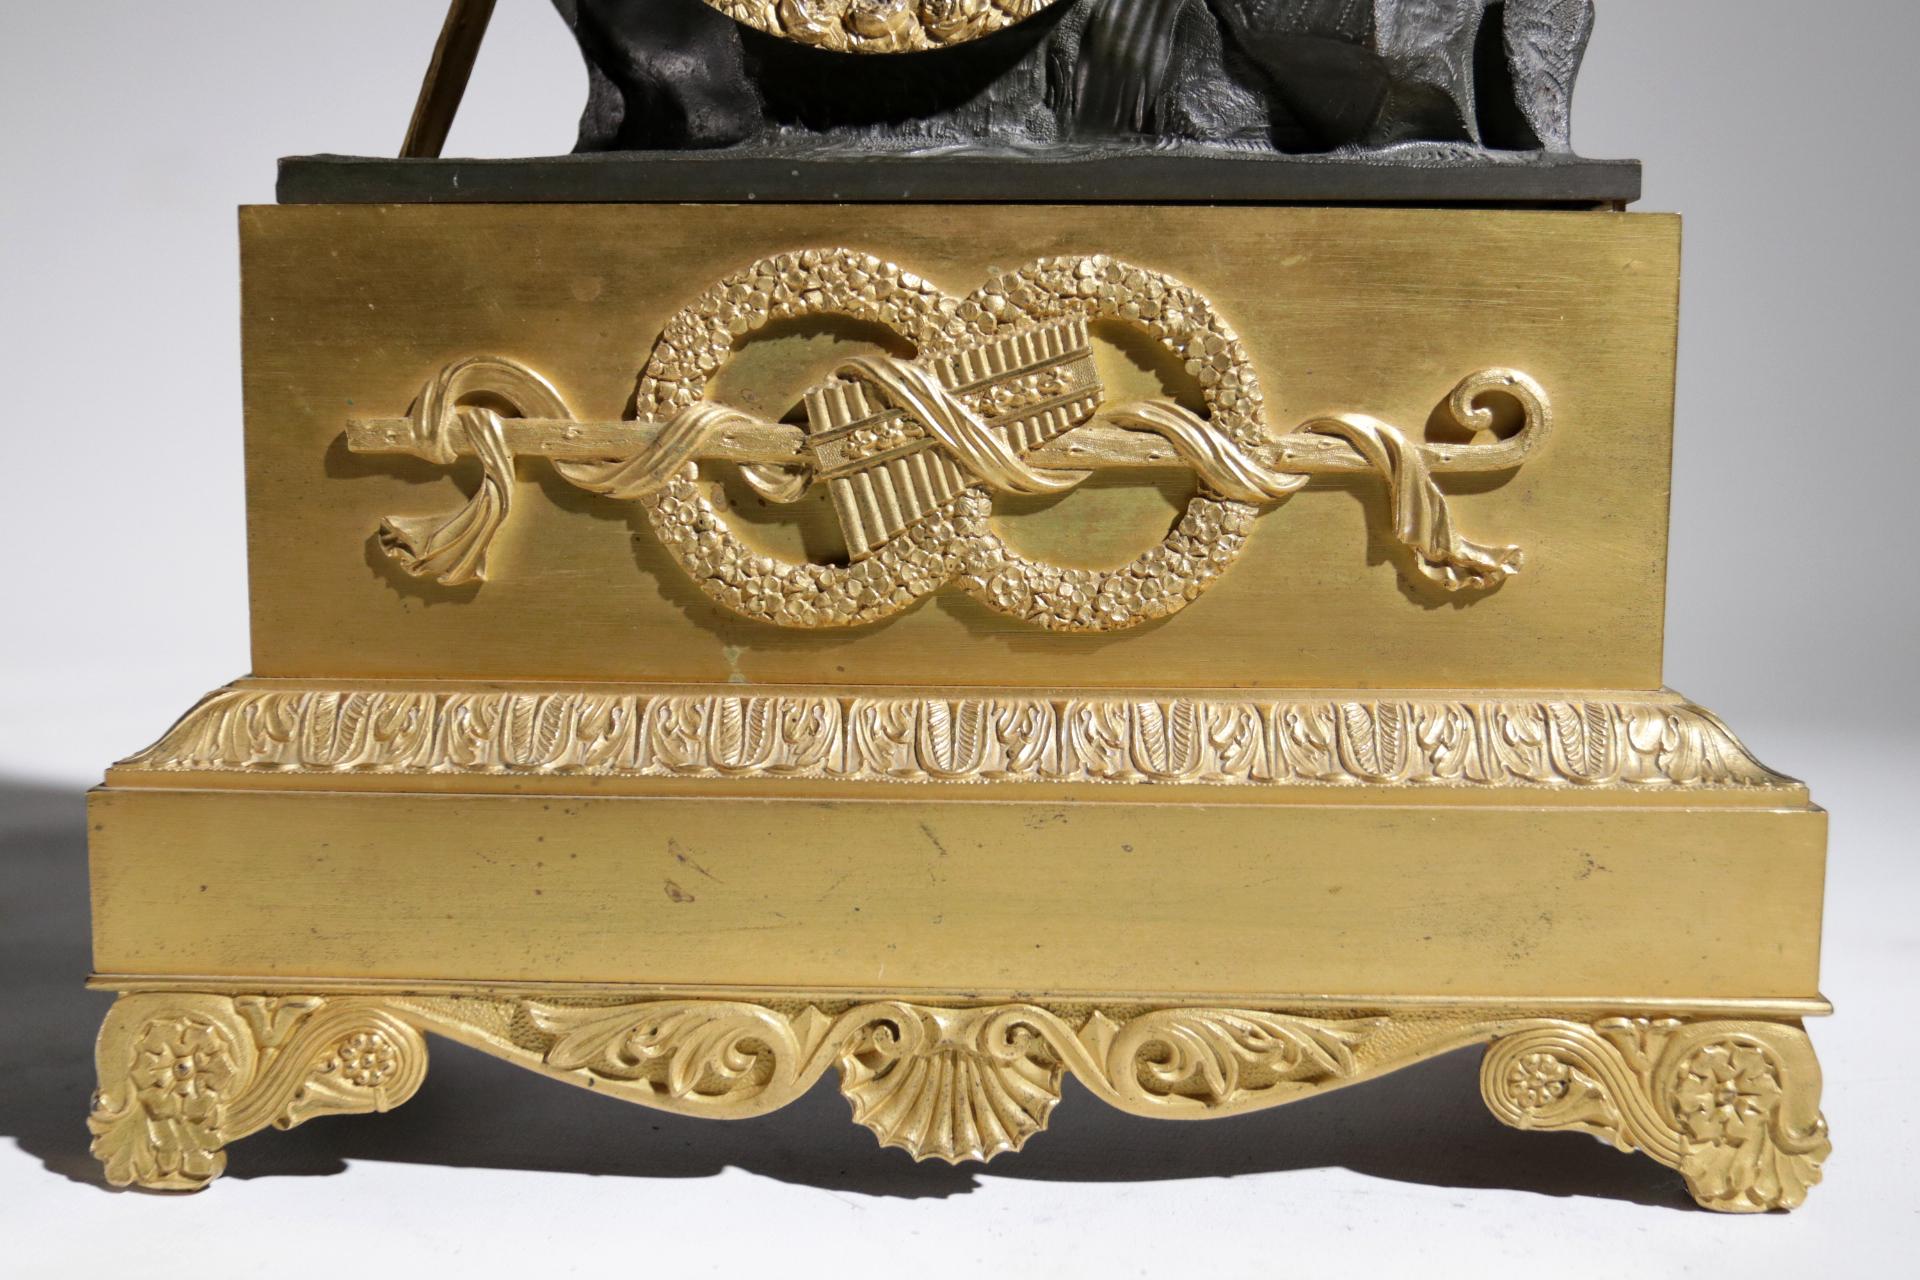 Empire Fire Gilded Mantel Clock, circa 1820 In Good Condition For Sale In Boven Leeuwen, NL